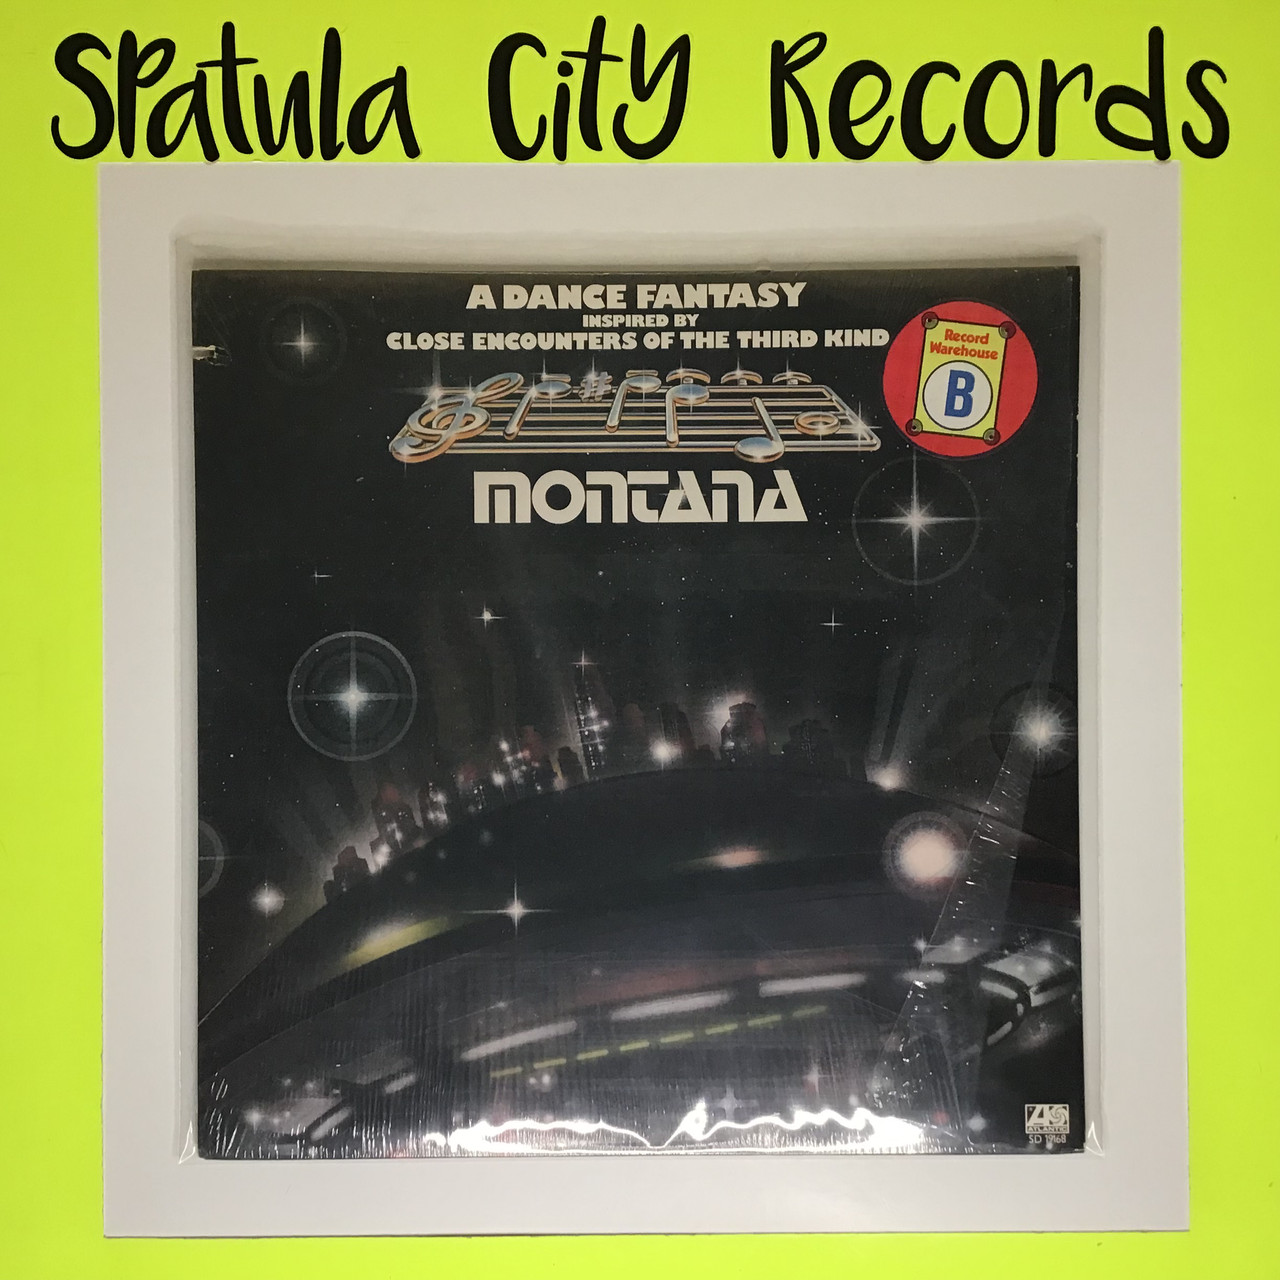 Montana - A Dance Fantasy Inspired By Close Encounters Of The Third Kind - vinyl record LP